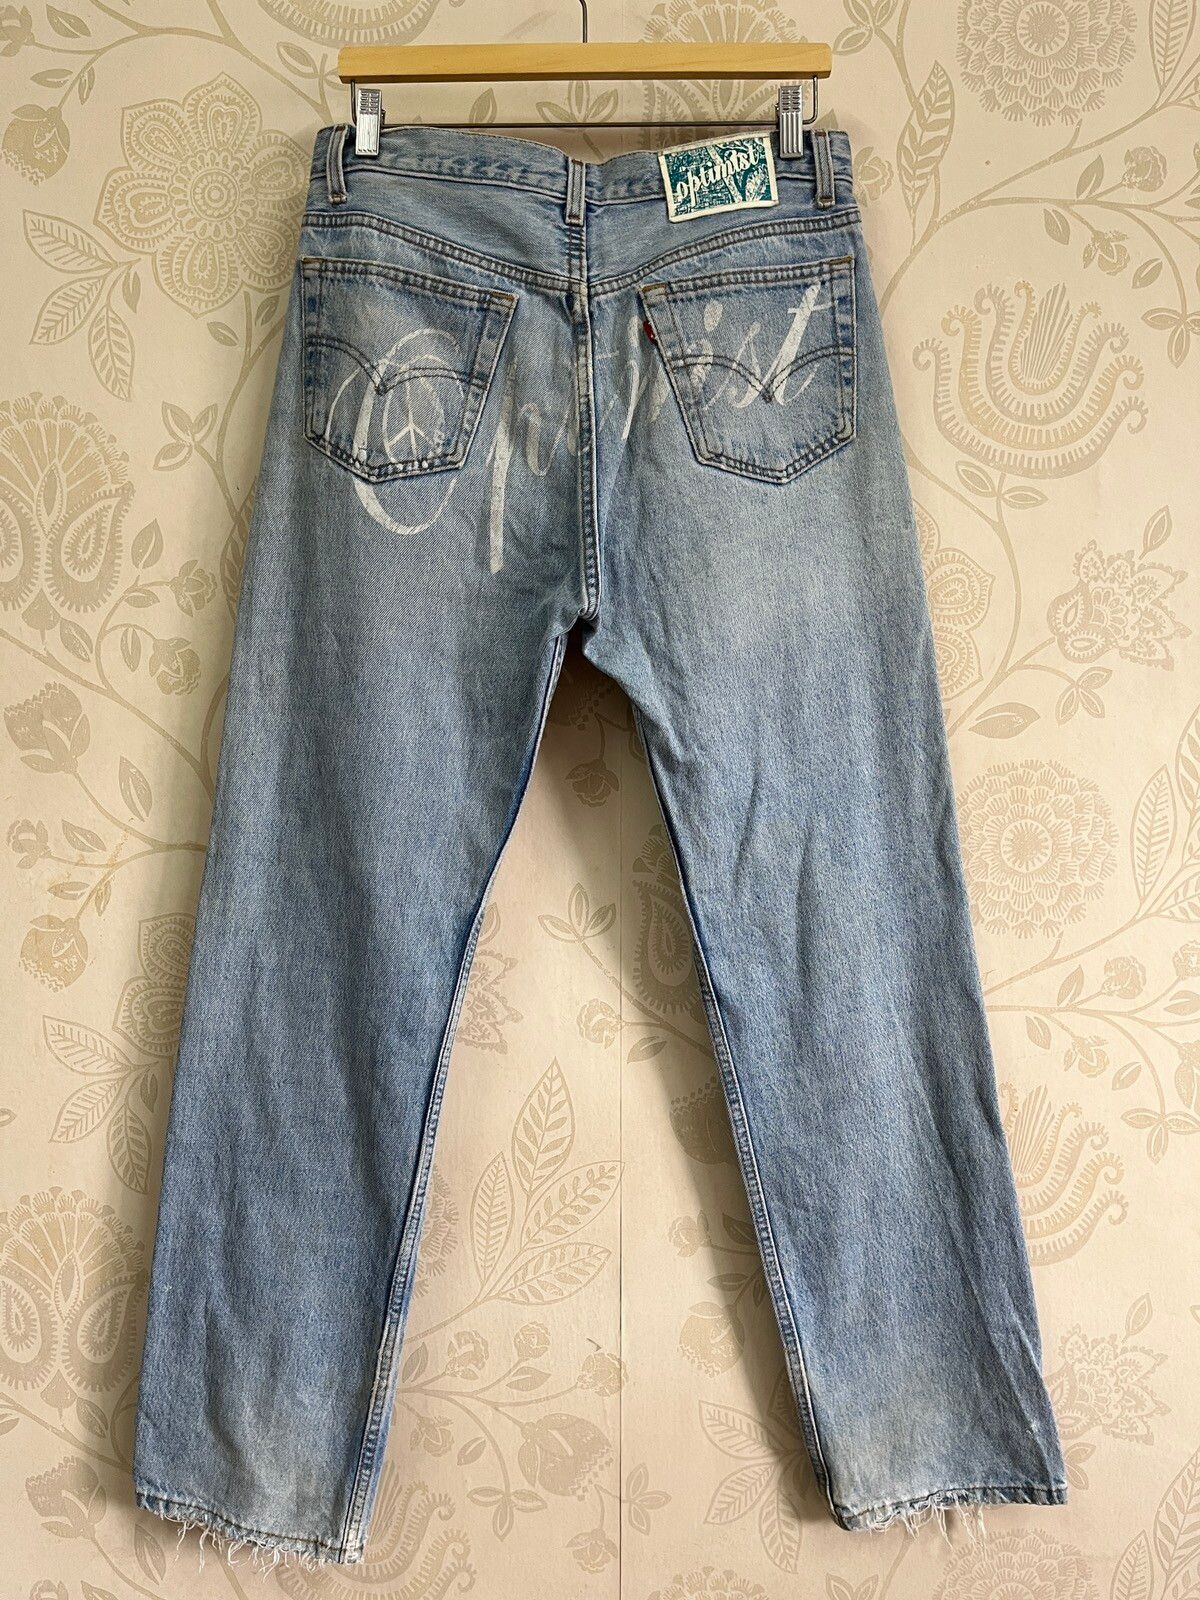 Vintage Levis 501 X Optimist Buttons Crafted - 2